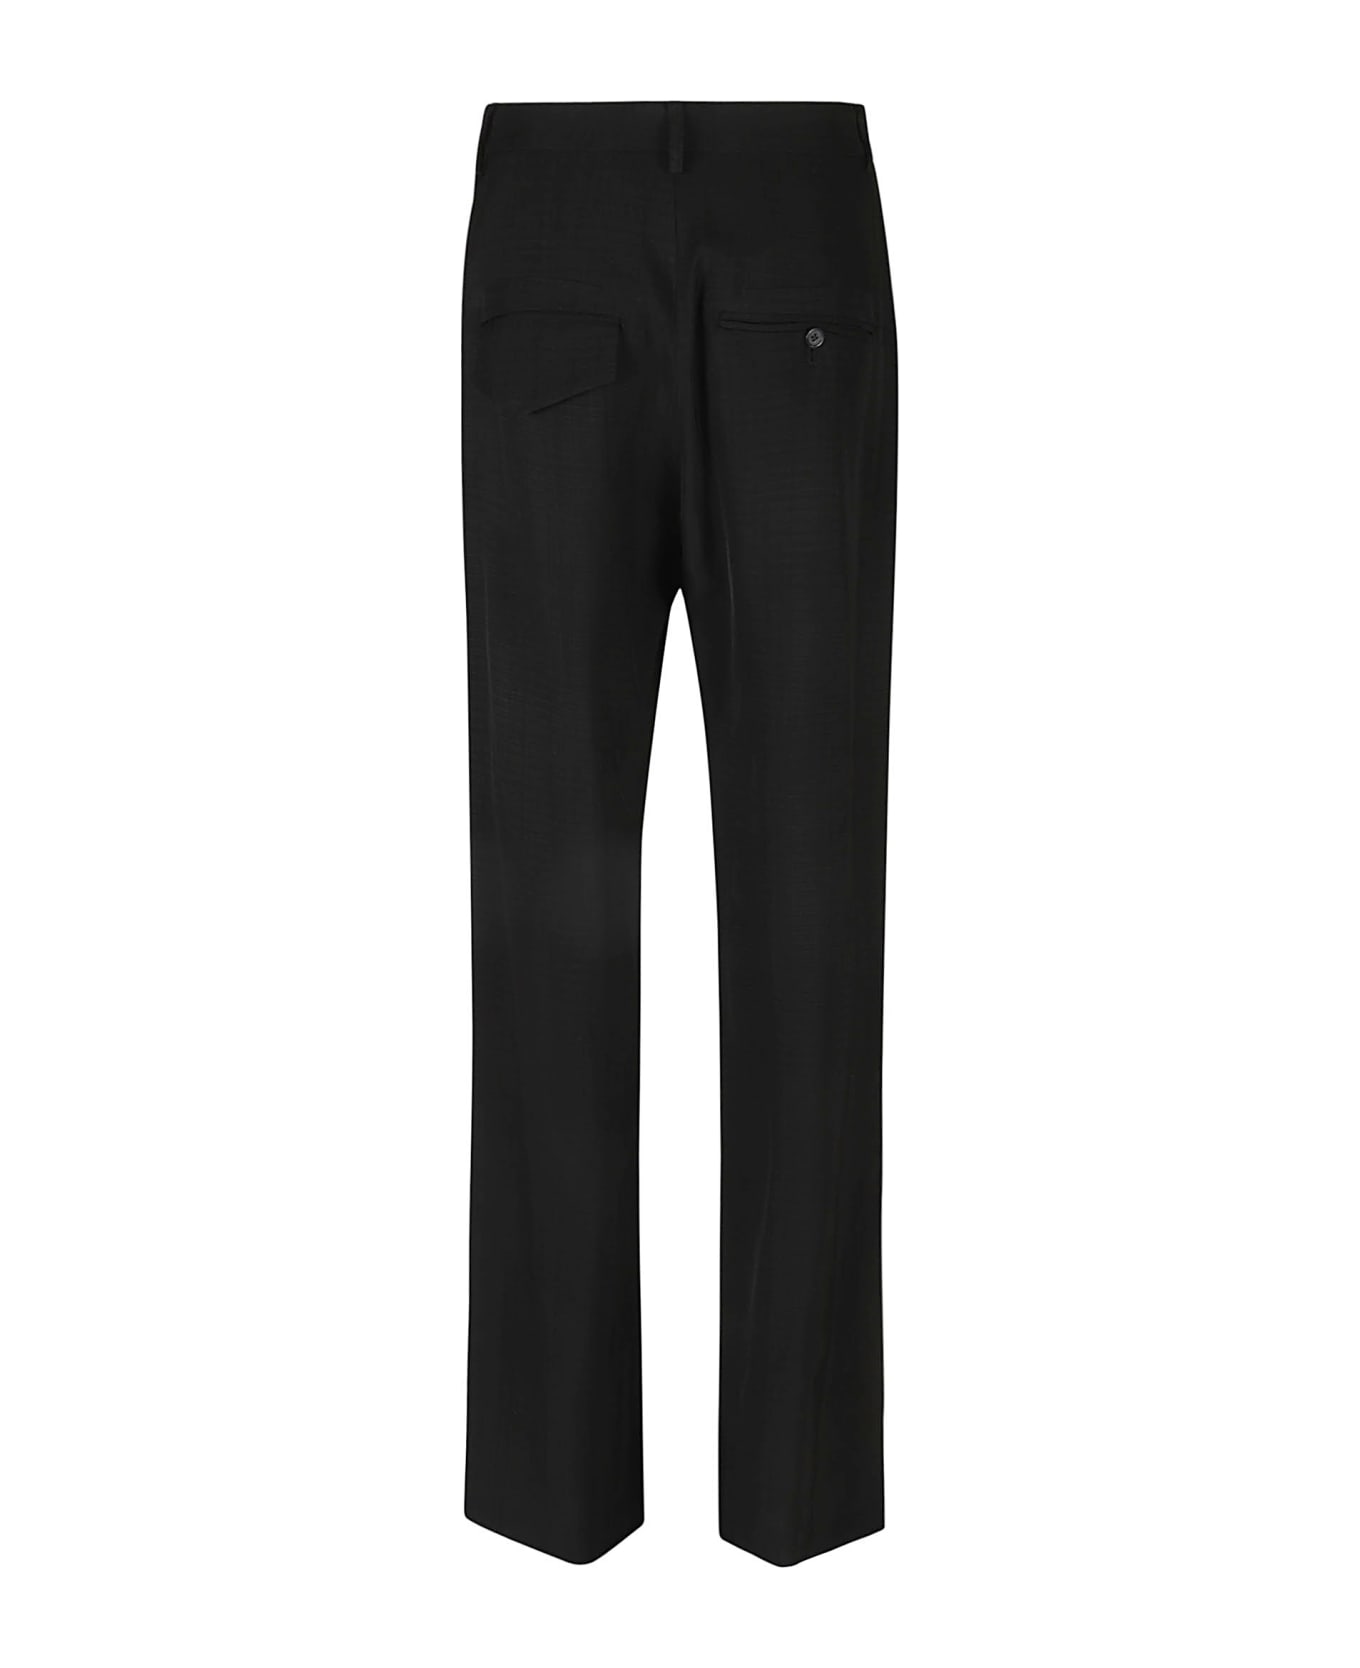 Colville Twisted Trousers - Black ボトムス